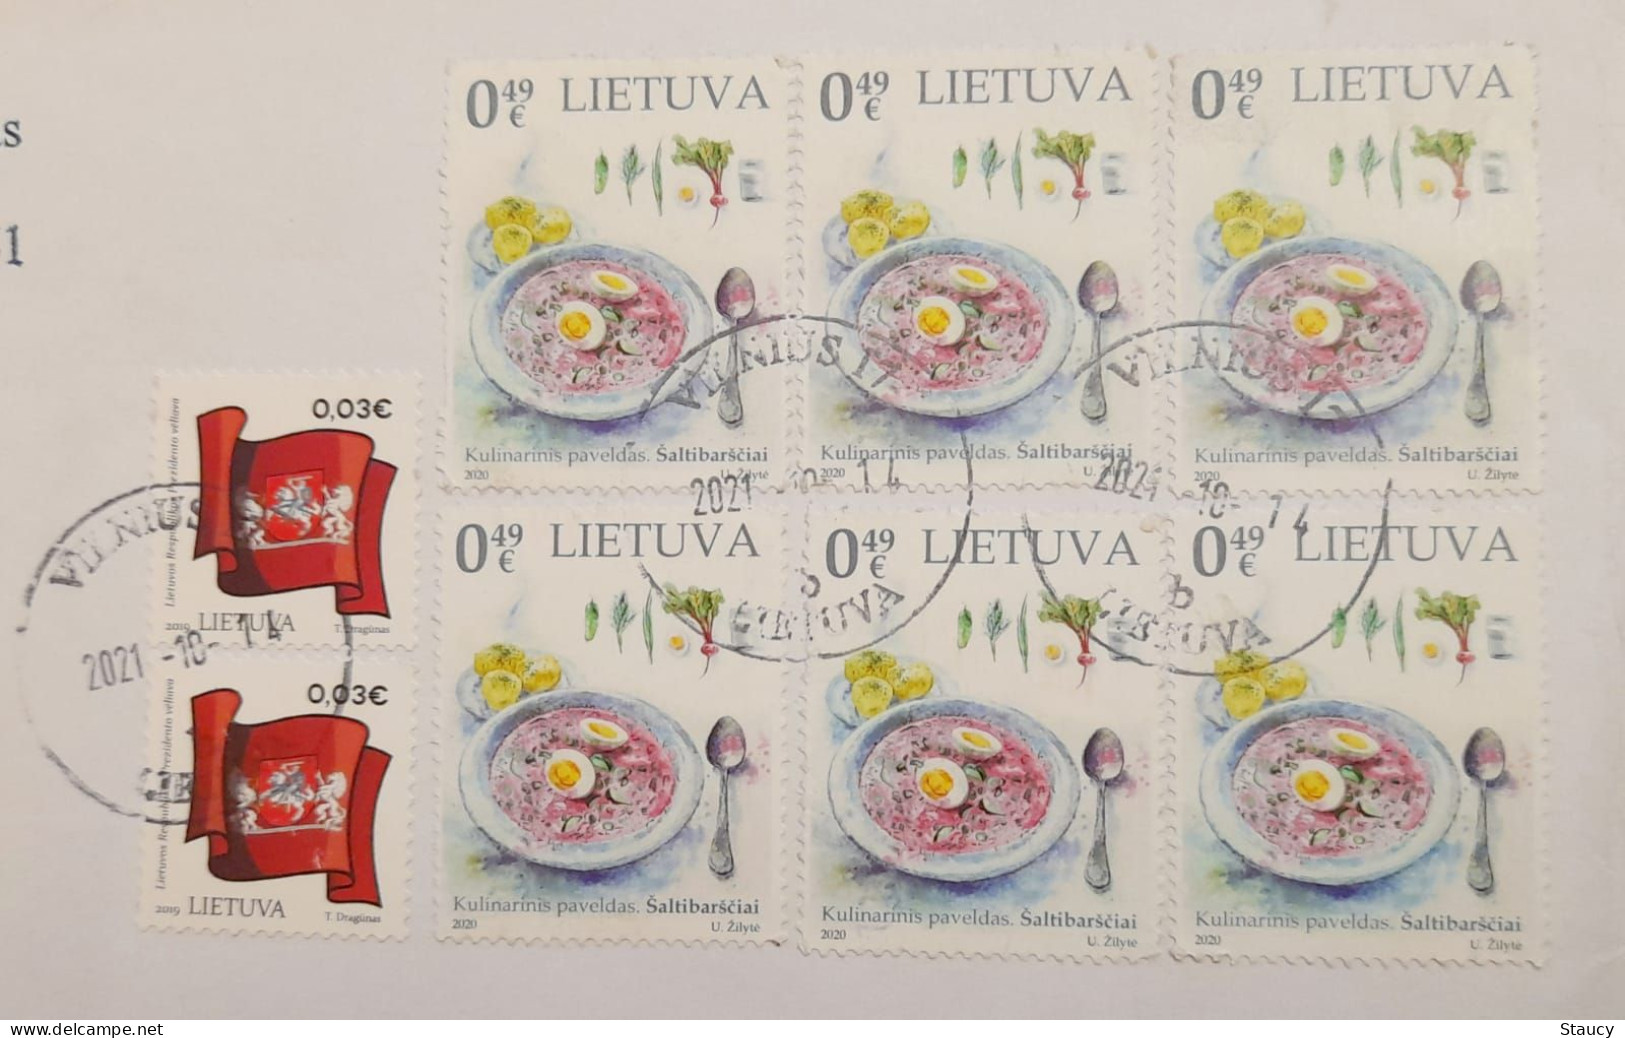 LITHUNIA 2021 2 FLAG + 6 DISHES STAMPS / MULTI FRANKING REGISTERED POSTAL TRAVELLED COVER TO INDIA As Per Scan - Enveloppes